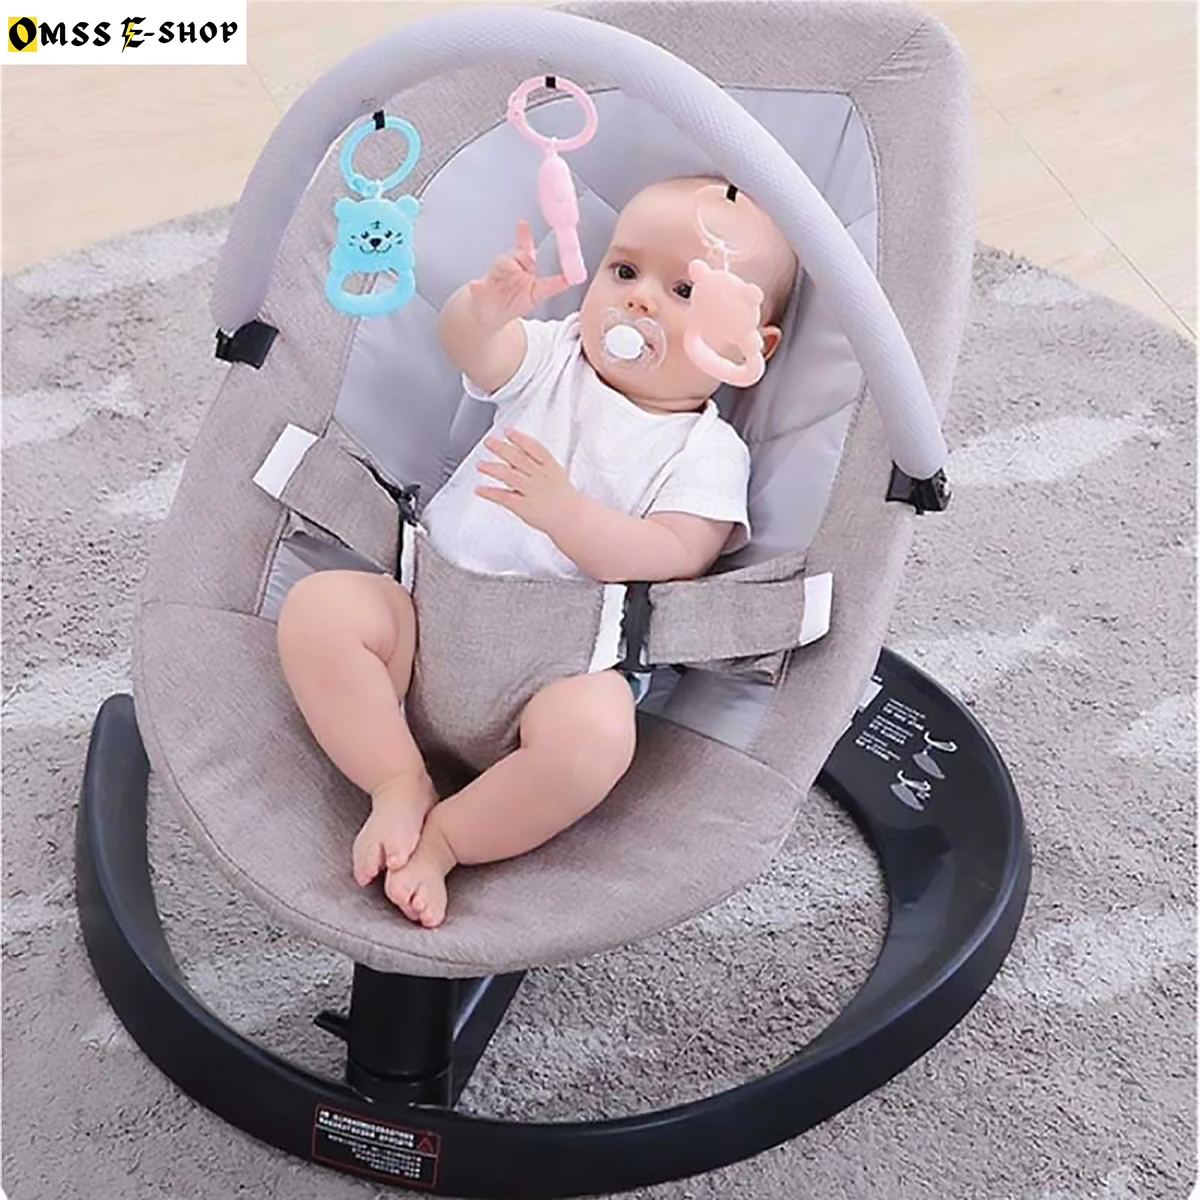 Baby Safety Swing Bouncer Rocking Chair For Newborn Baby Sleeping Basket Automatic Cradle With Seat Cushion Rocker Chair RP-2200DH-RE